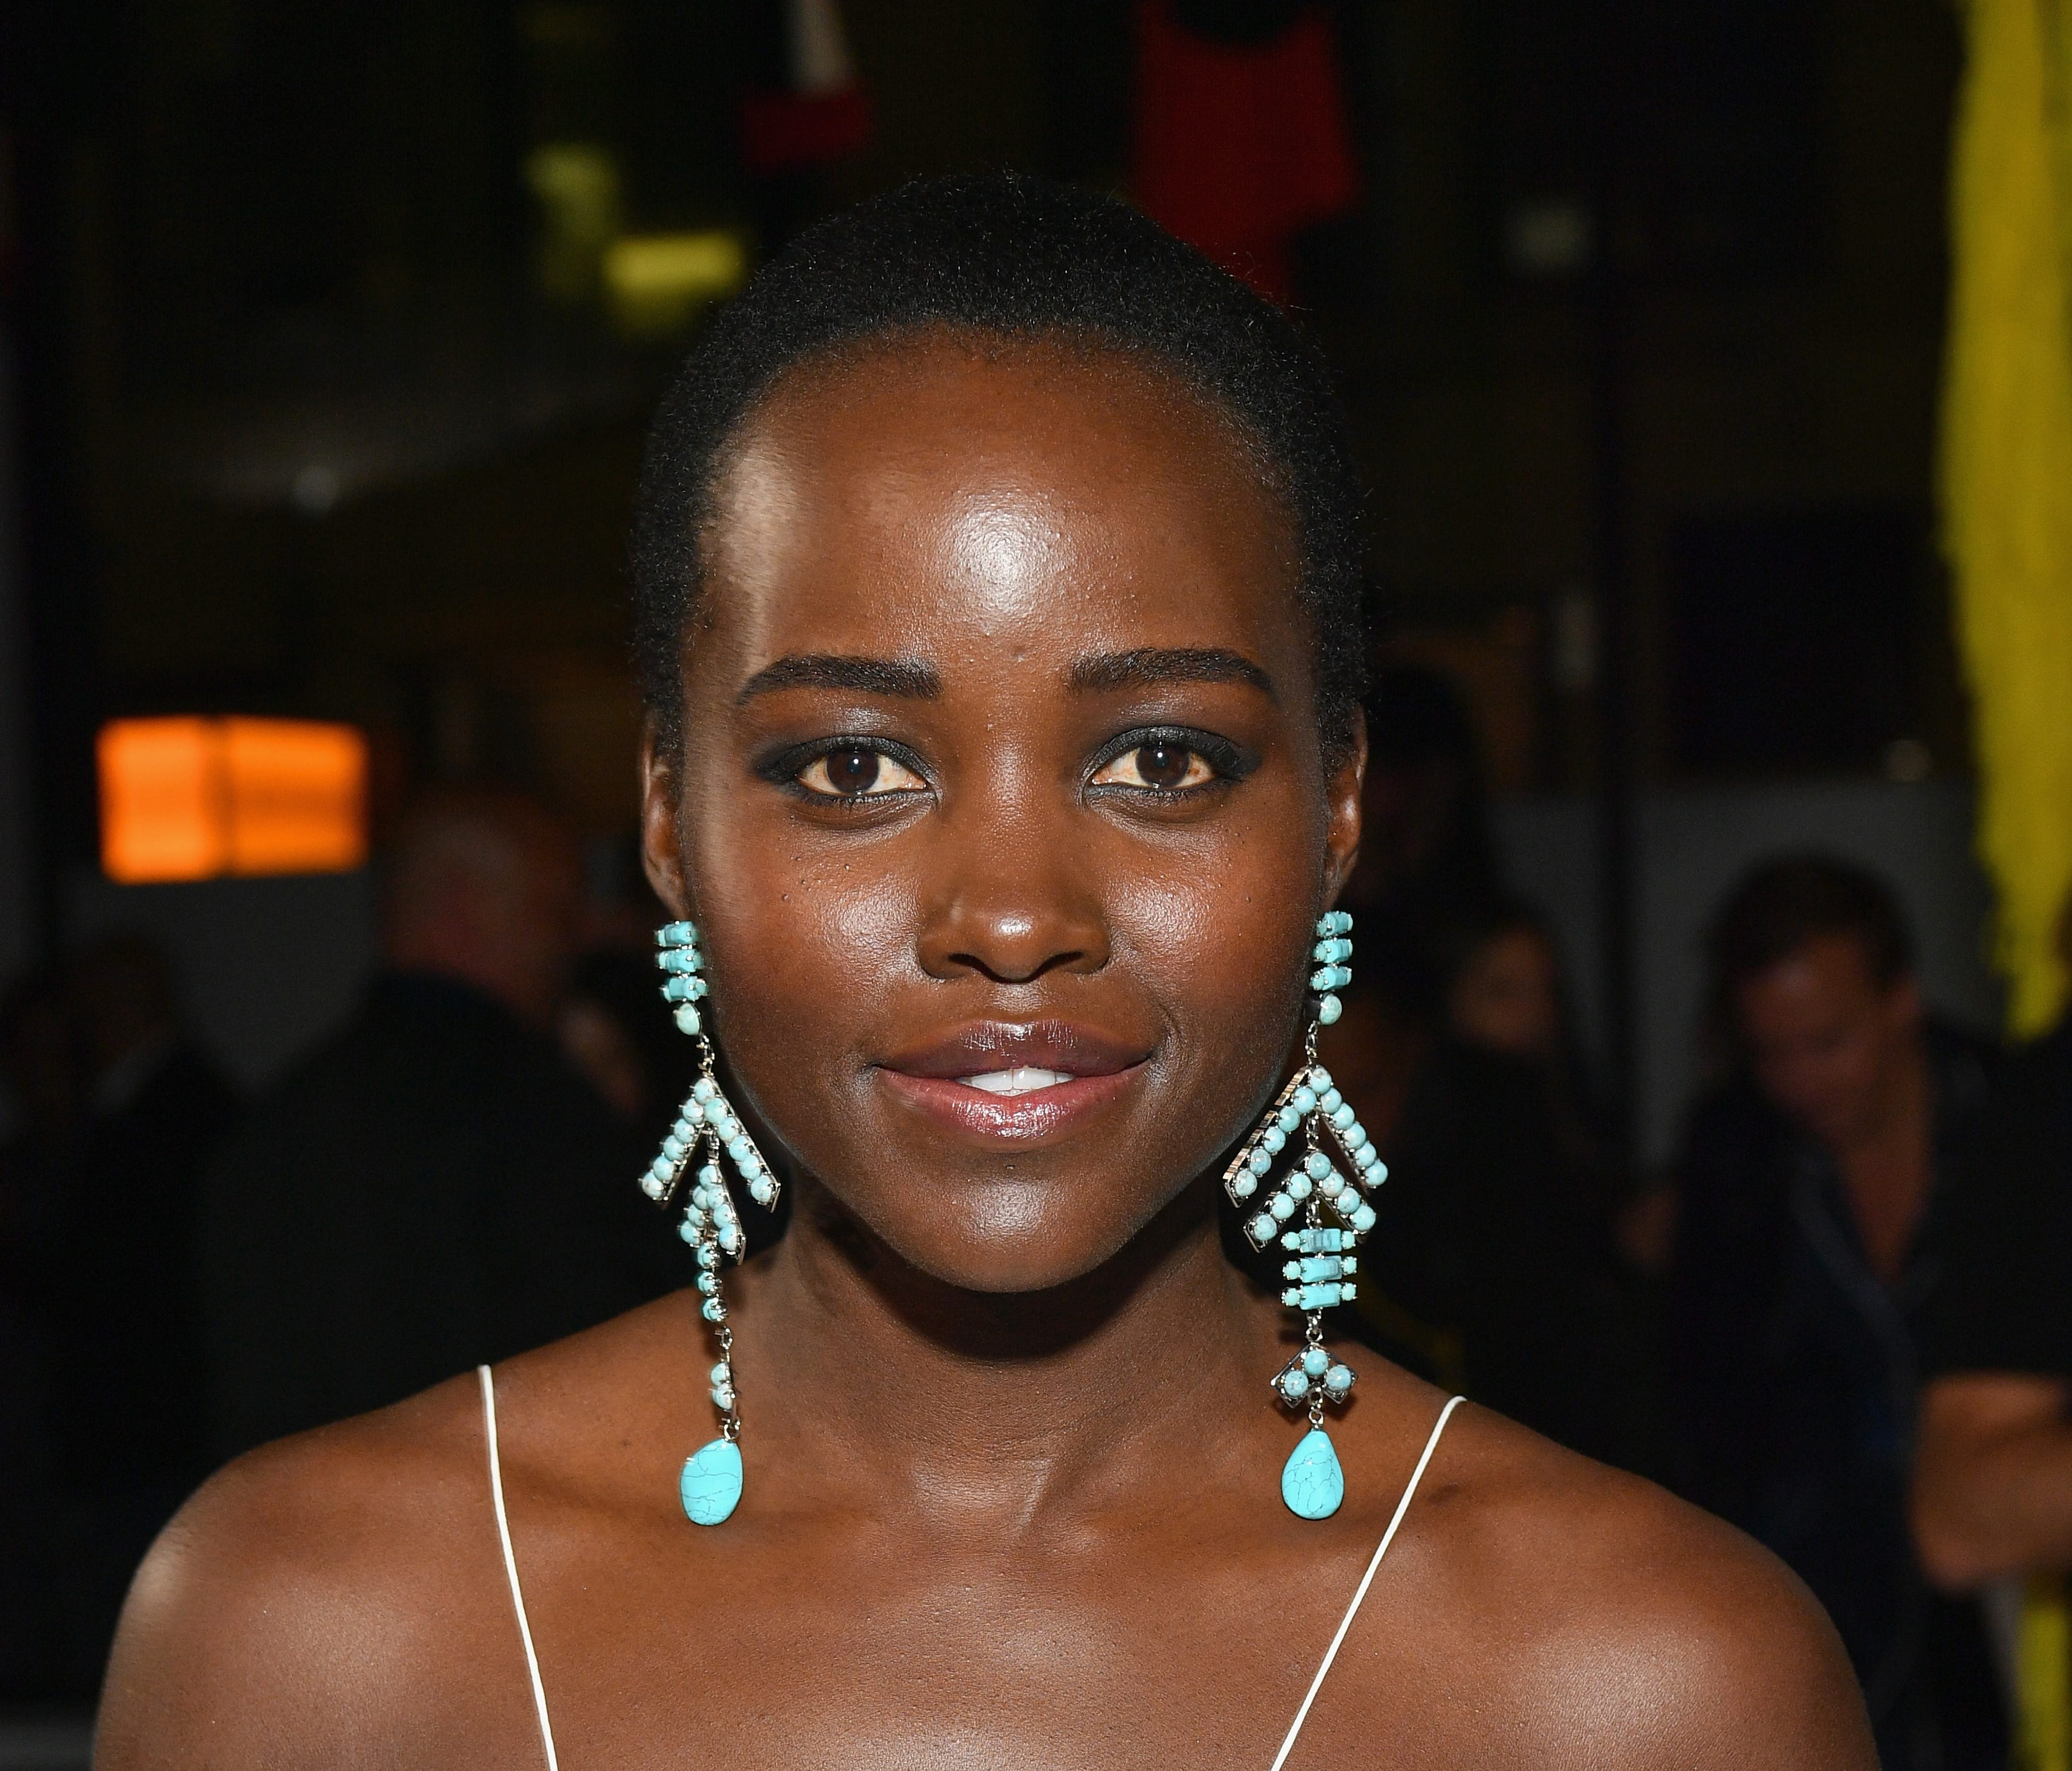 Actress Lupita Nyong'o has written about her encounters with producer Harvey Weinstein.